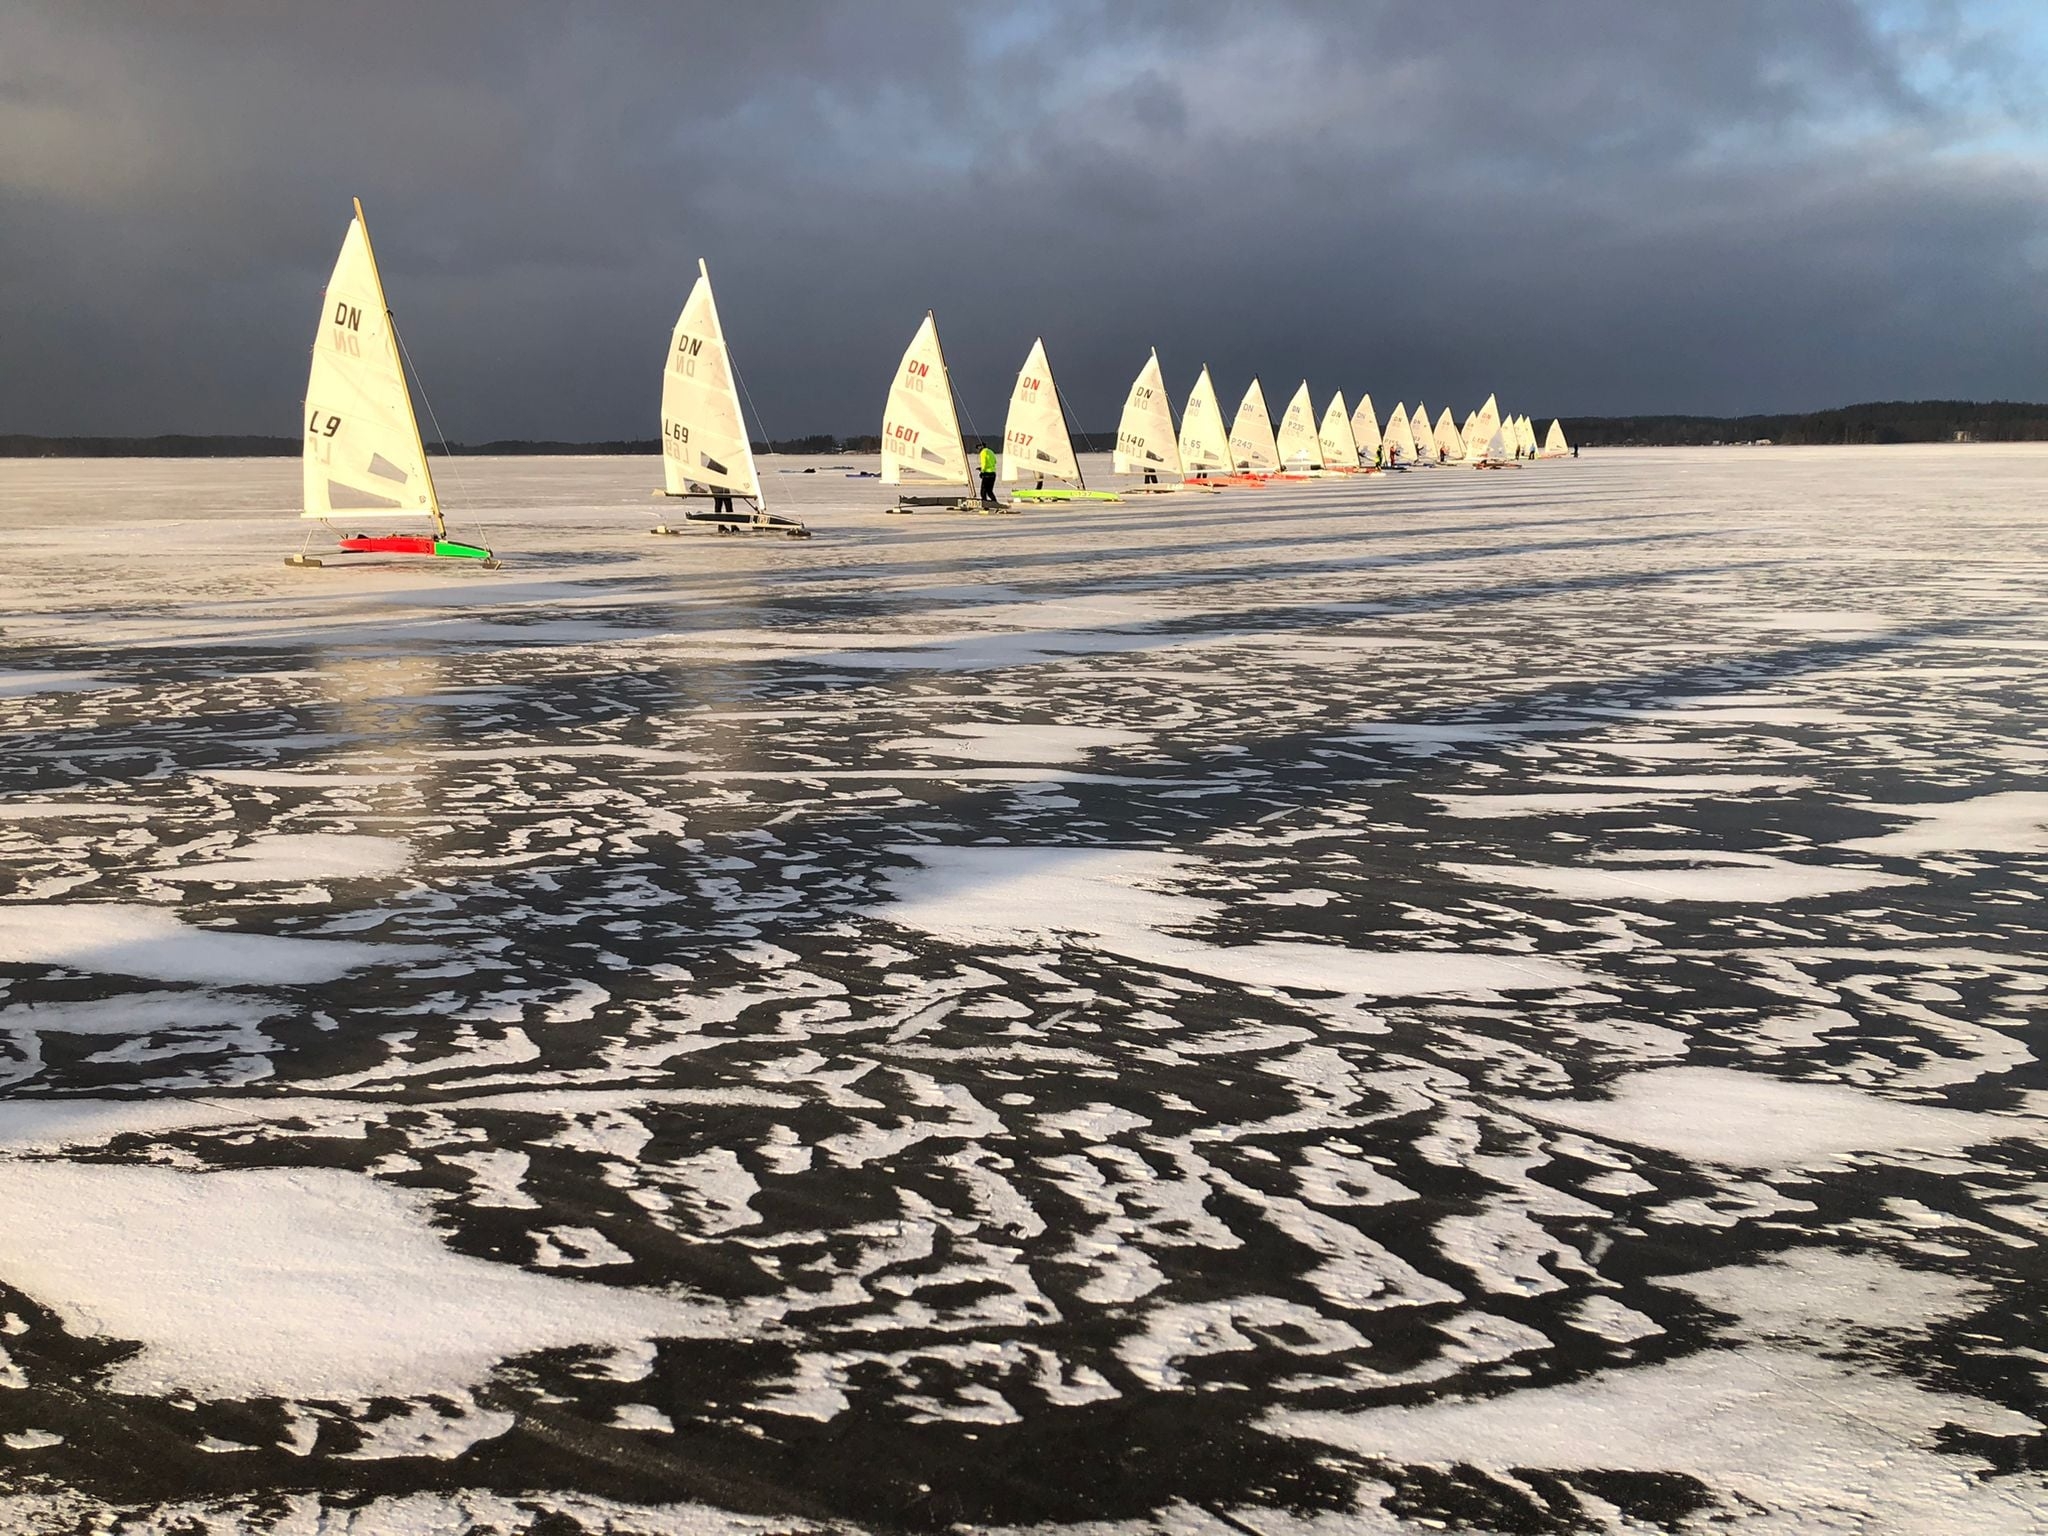  IceSailing  DN Grand Masters Cup  Lake Oljaren SWE  Day 2